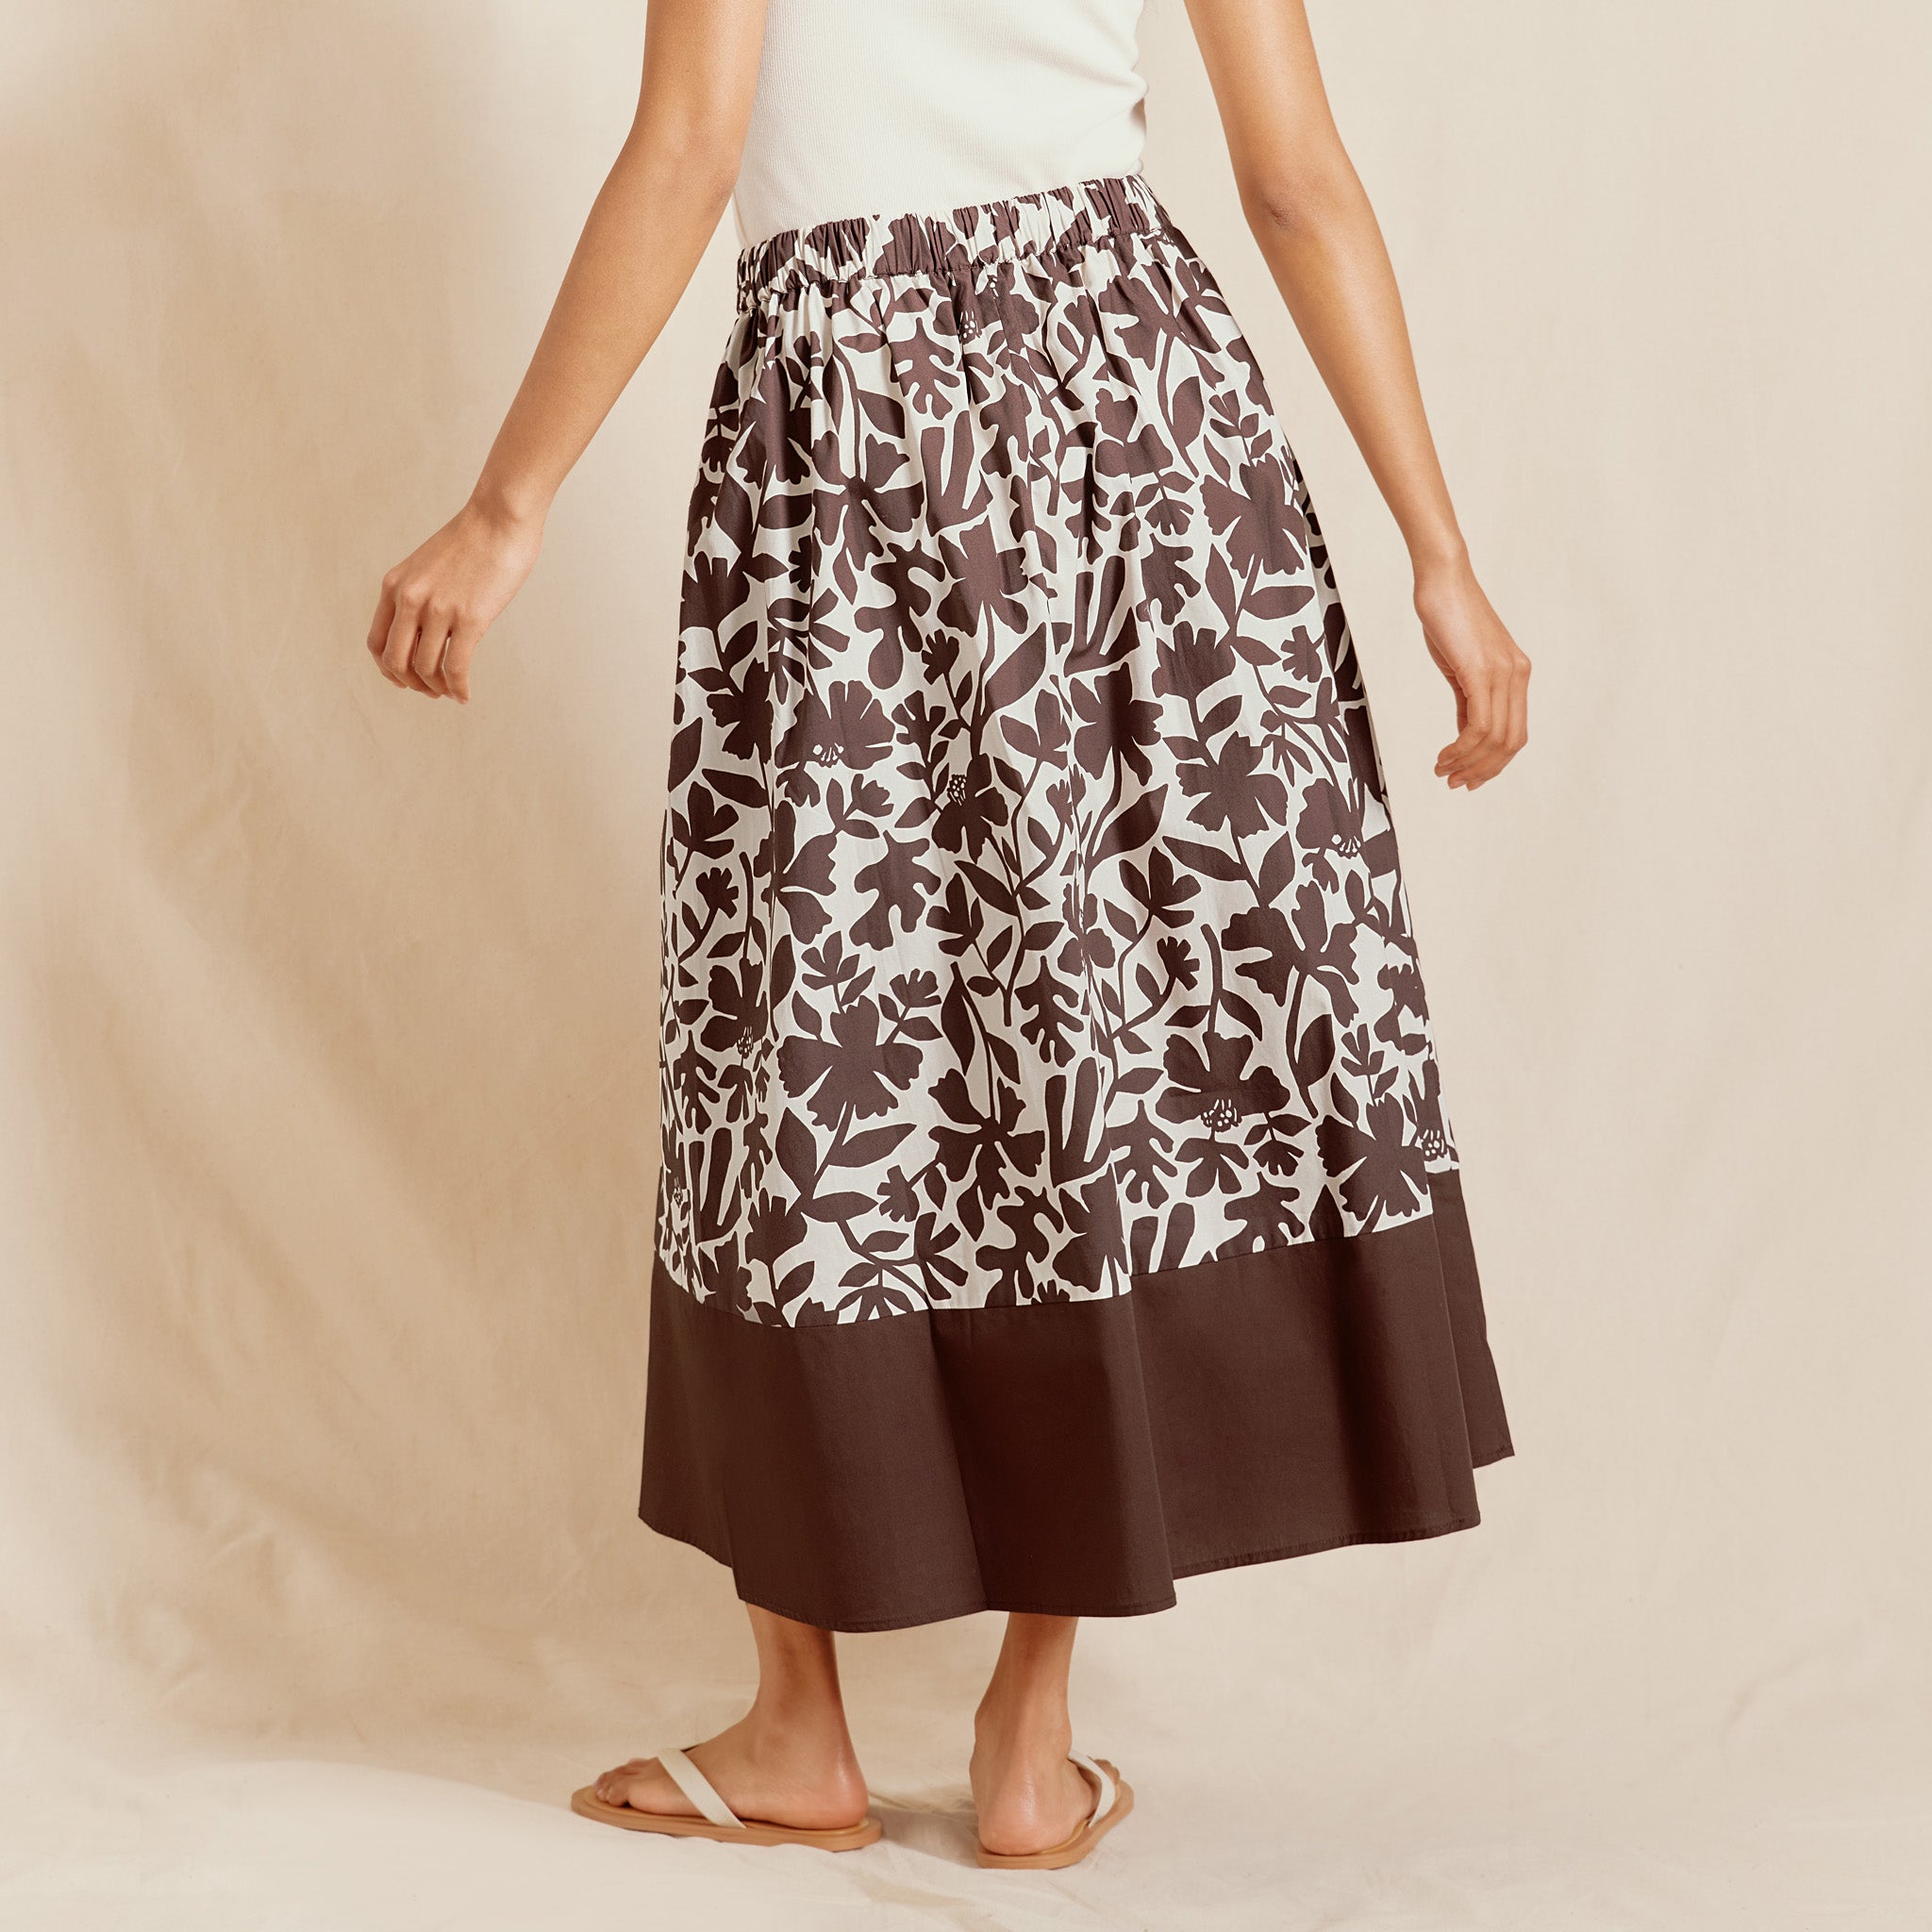 Cut Out Floral Skirt